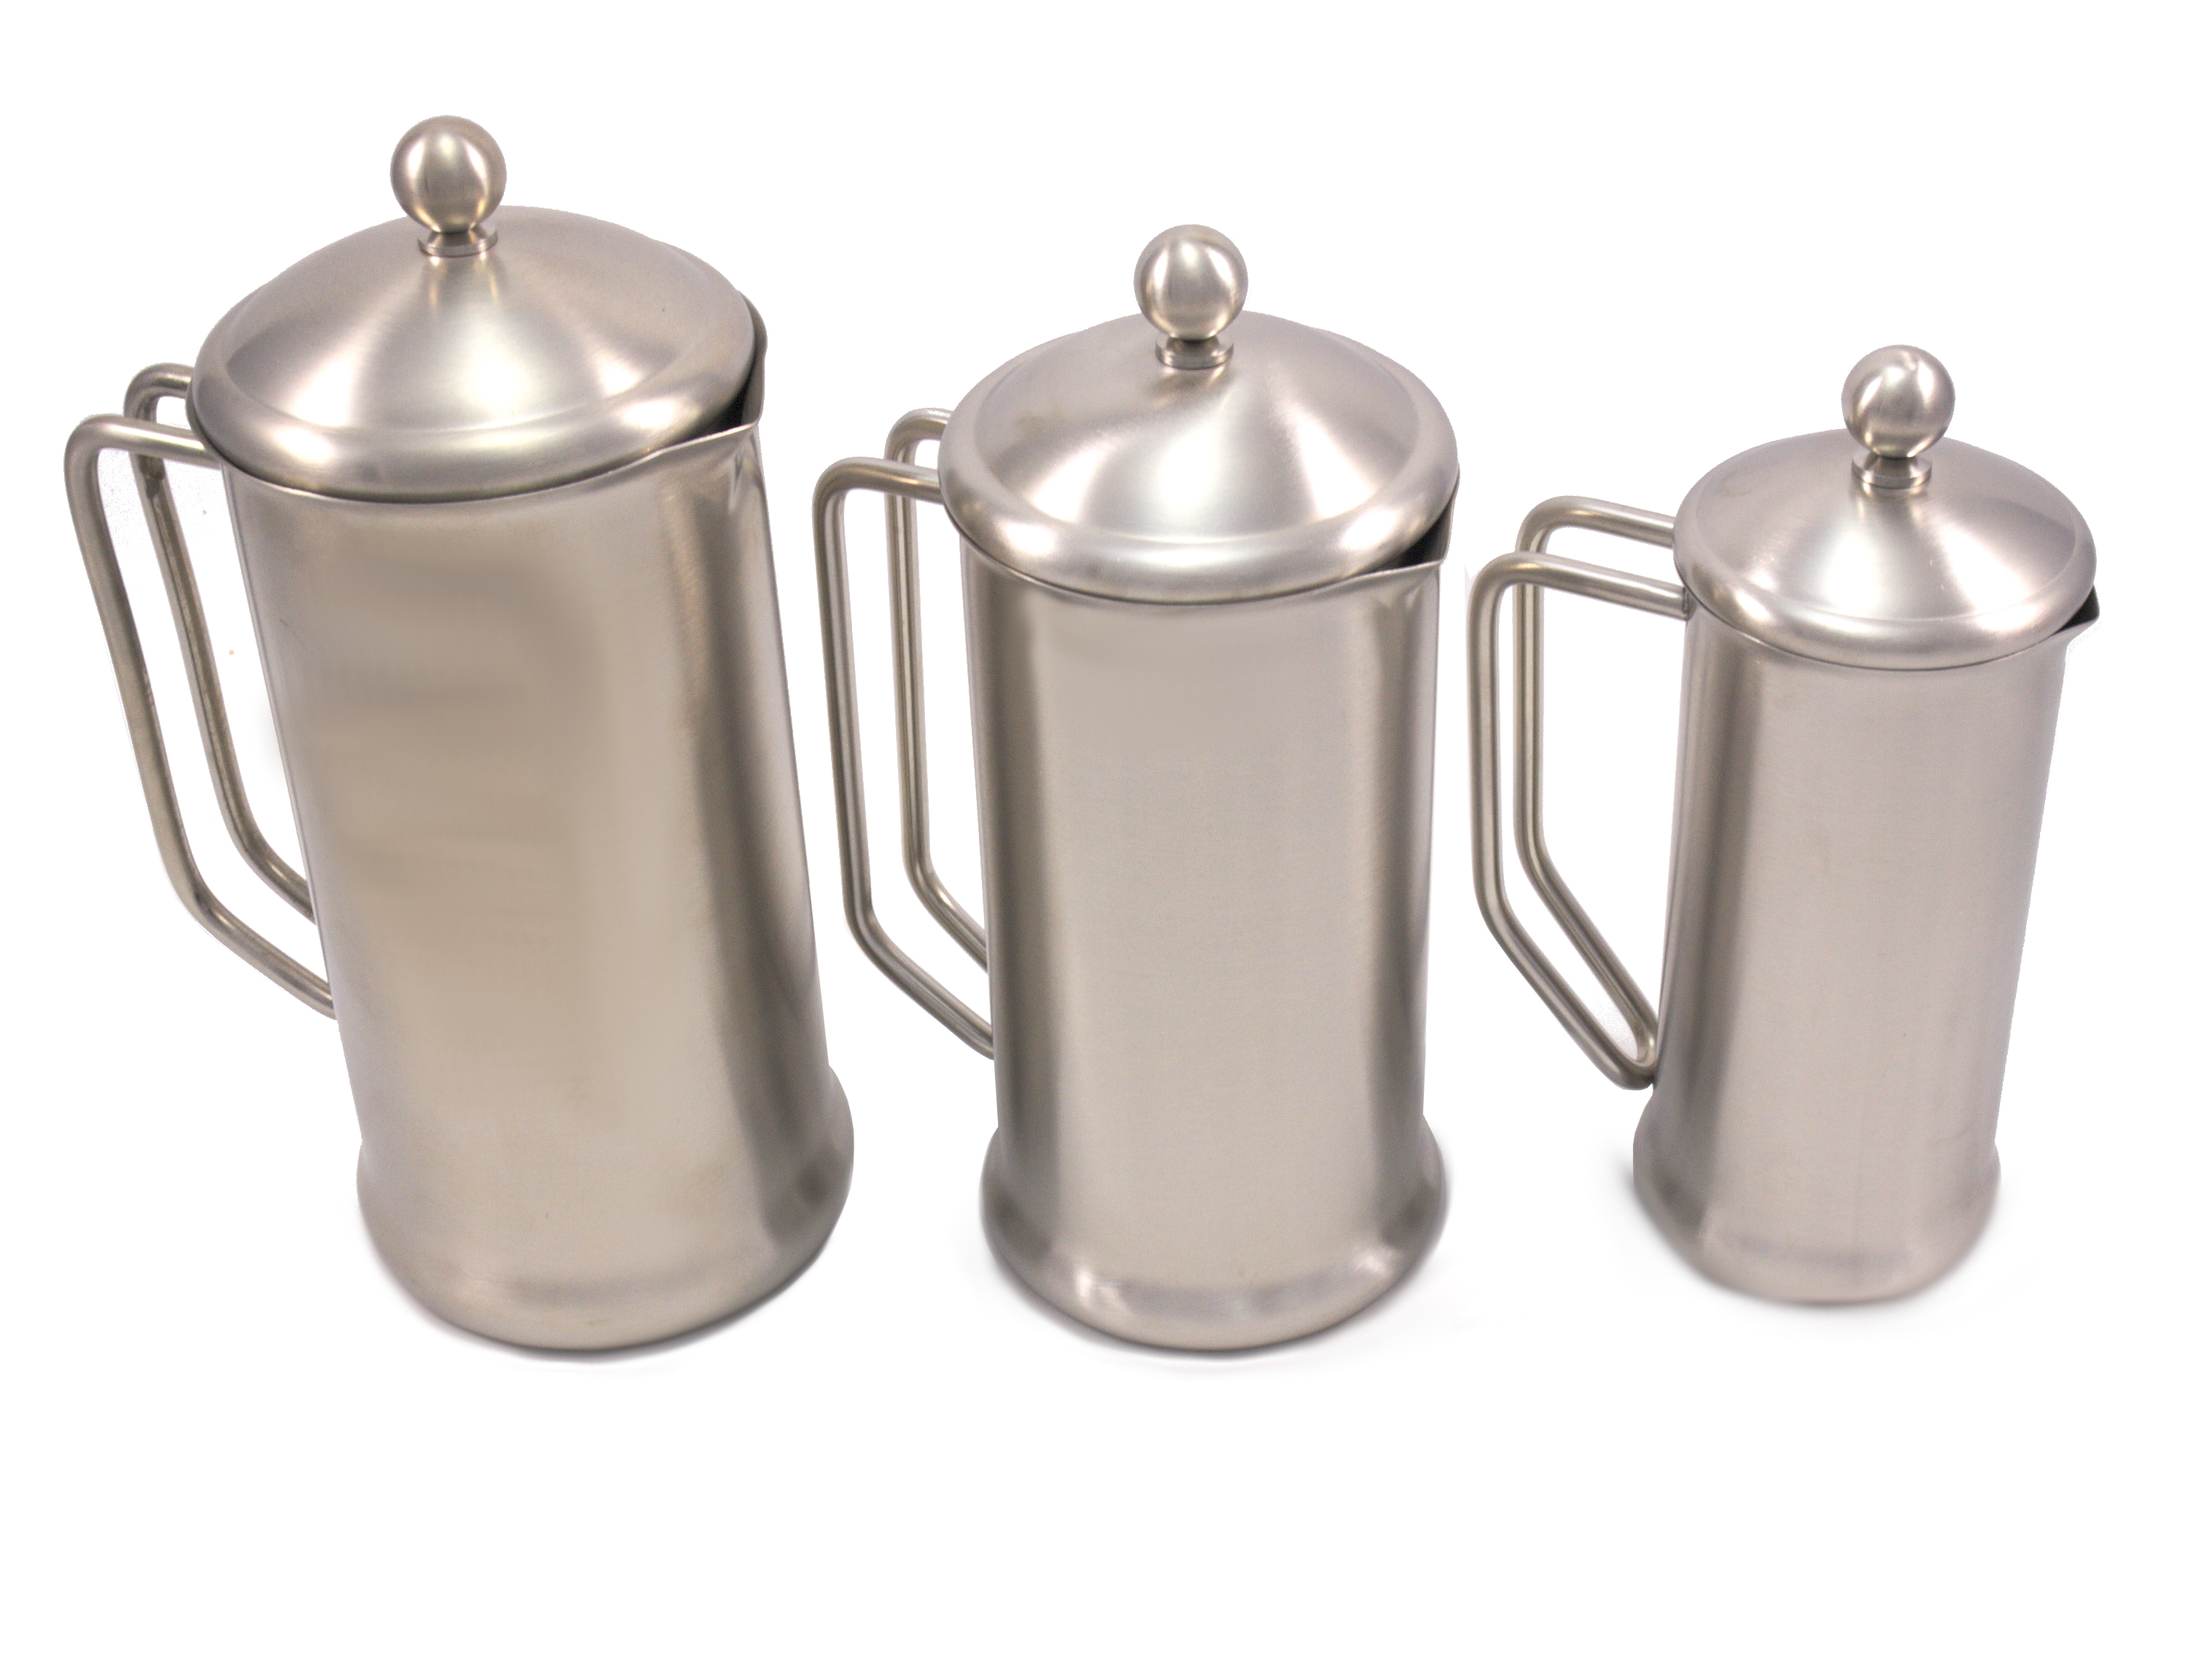 Stainless steel cafetieres SATIN finish (various sizes available)